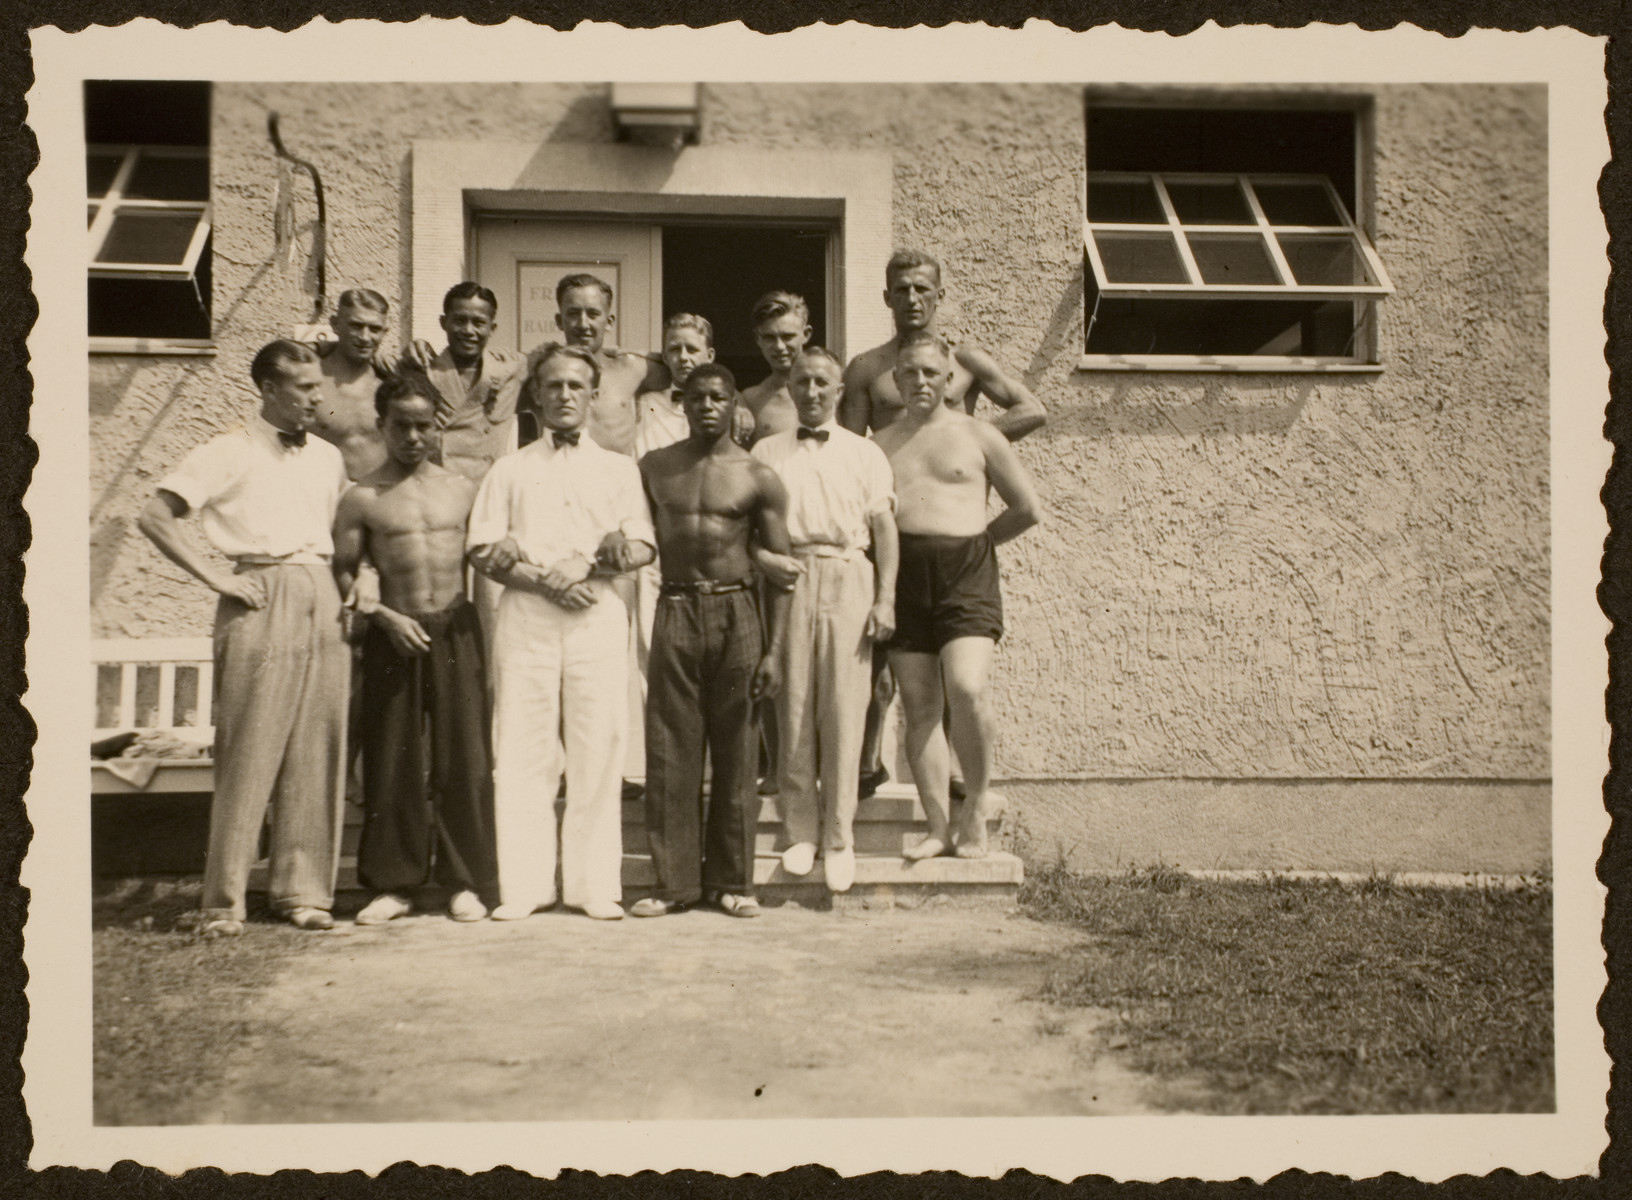 A group of athletes pose in front of one of the residences in the Olympic village.  Among those pictured is American athlete, Archie Williams, fourth  from the left. 

The identities of the other athletes is unknown.